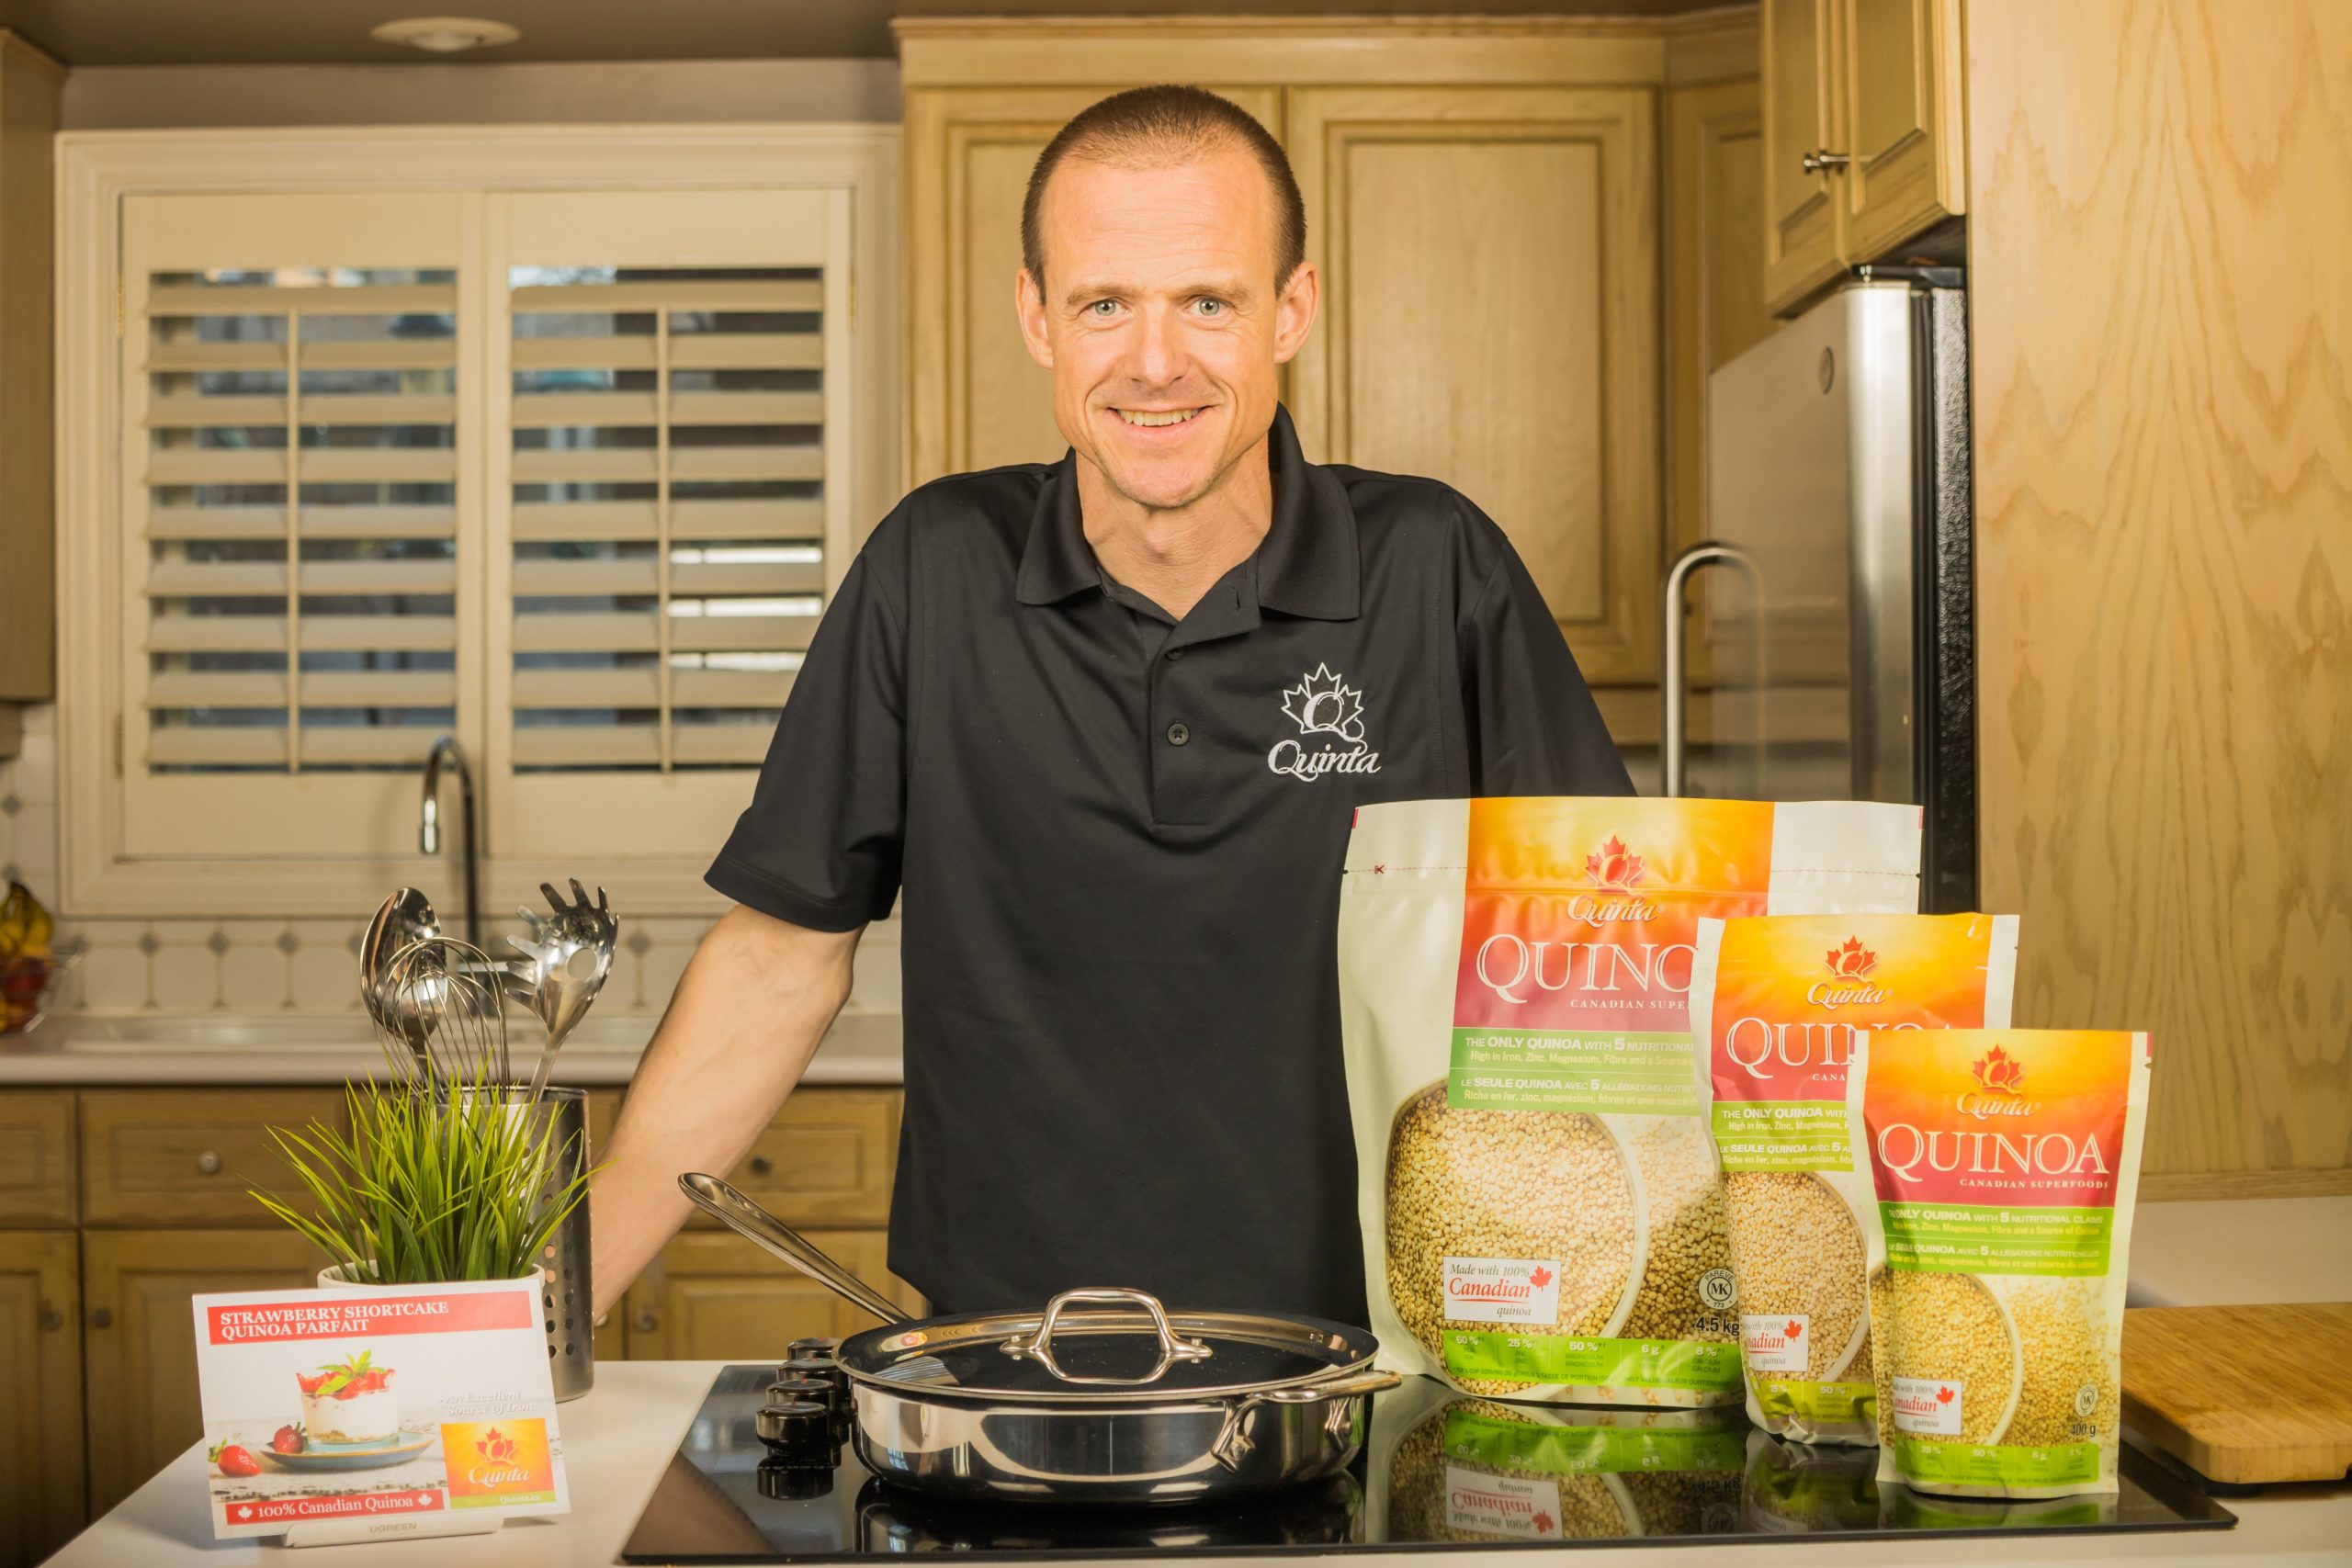 Jamie Draves, Founder and CEO, with Quinta Quinoa products